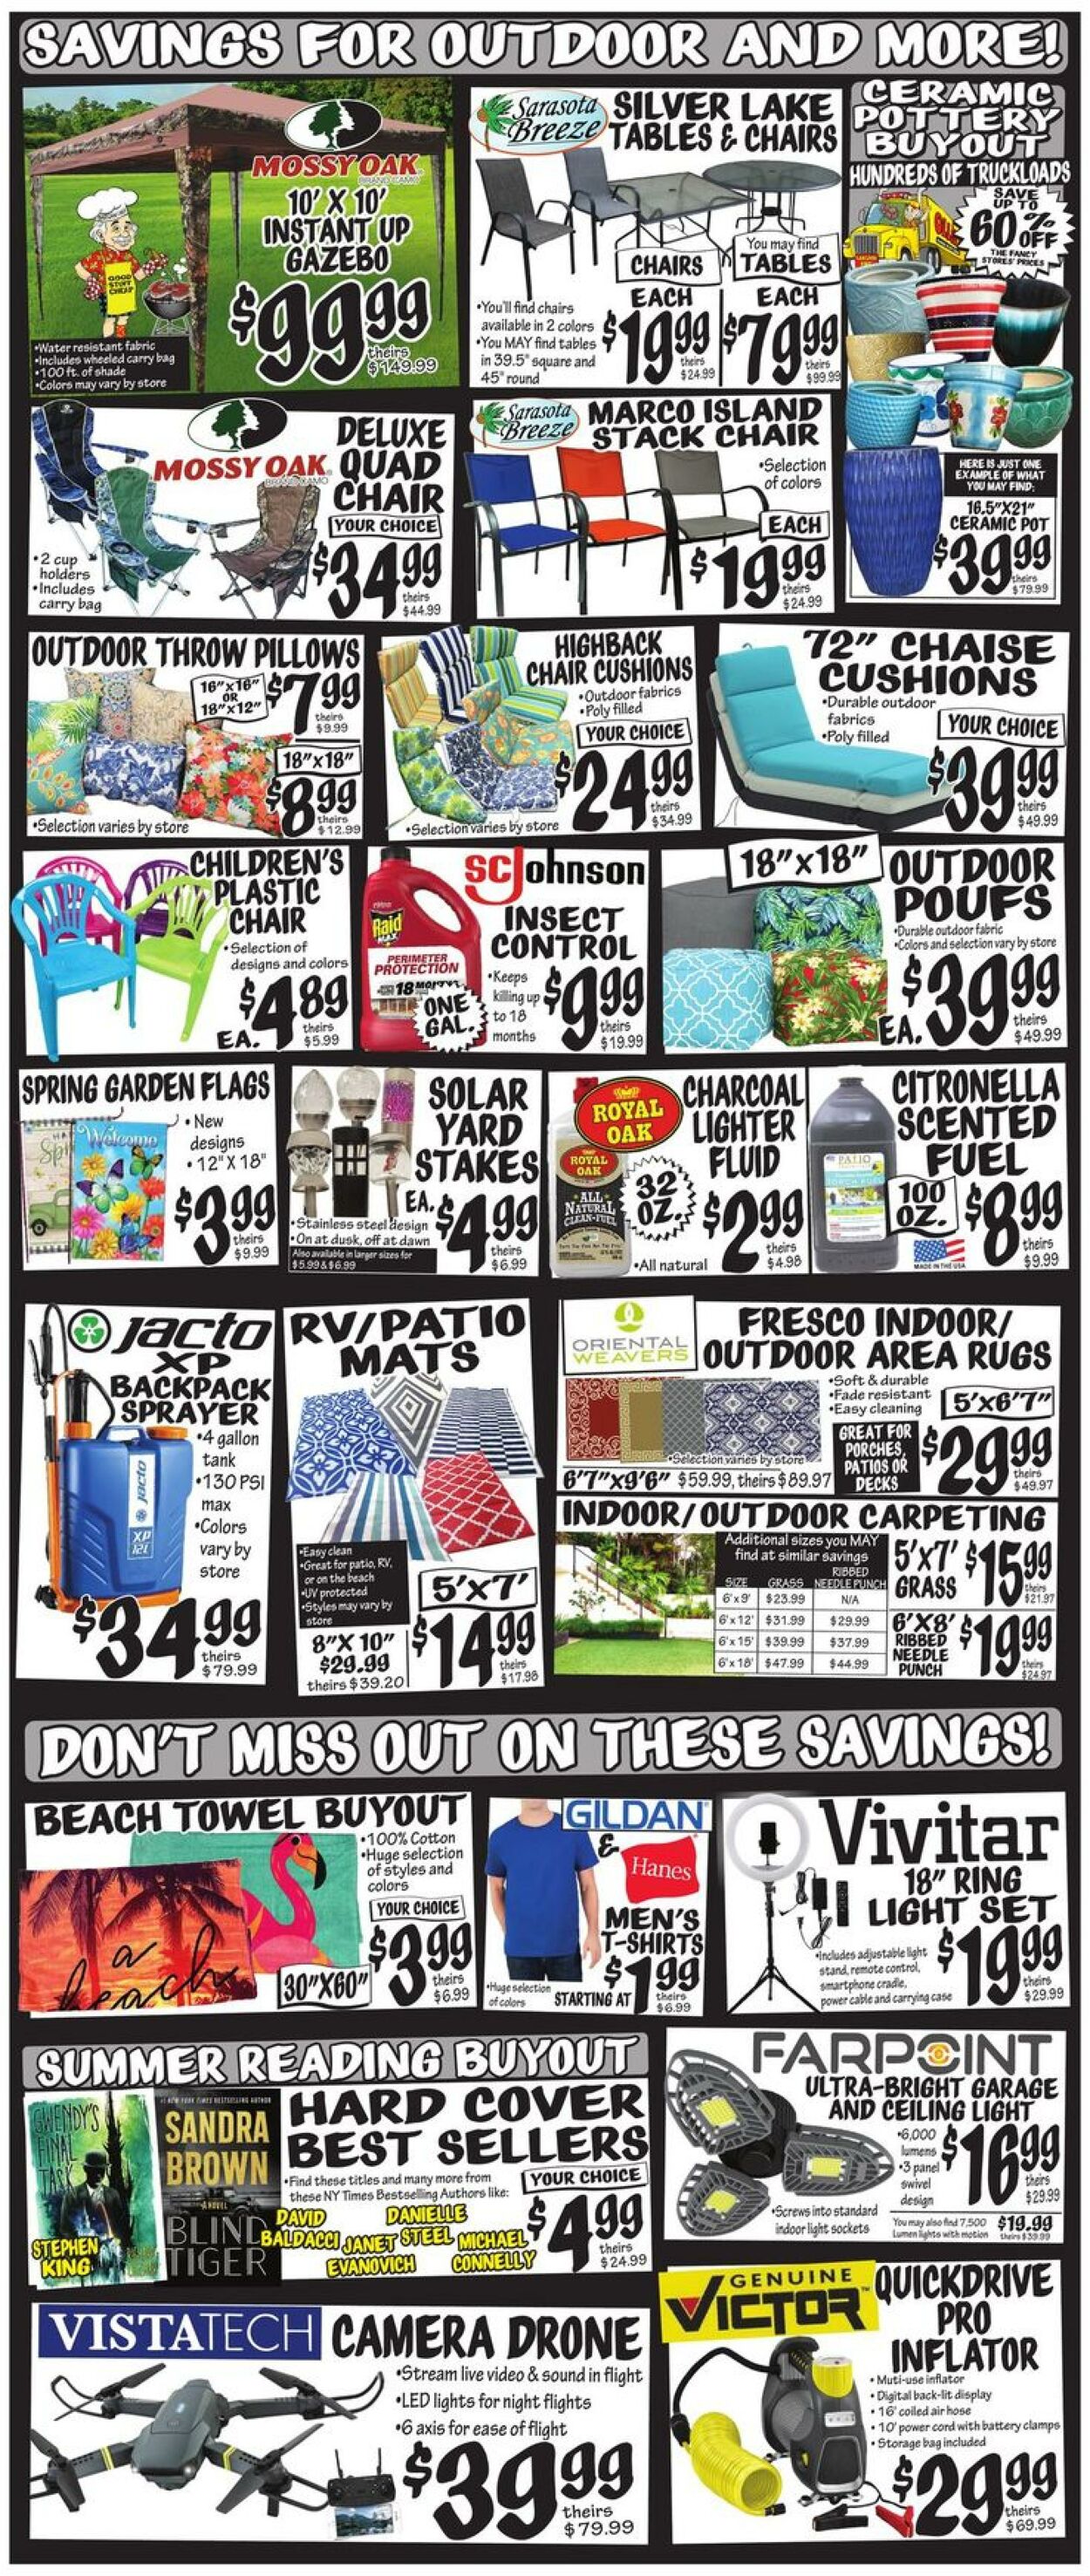 Ollie's Ad from 05/24/2023